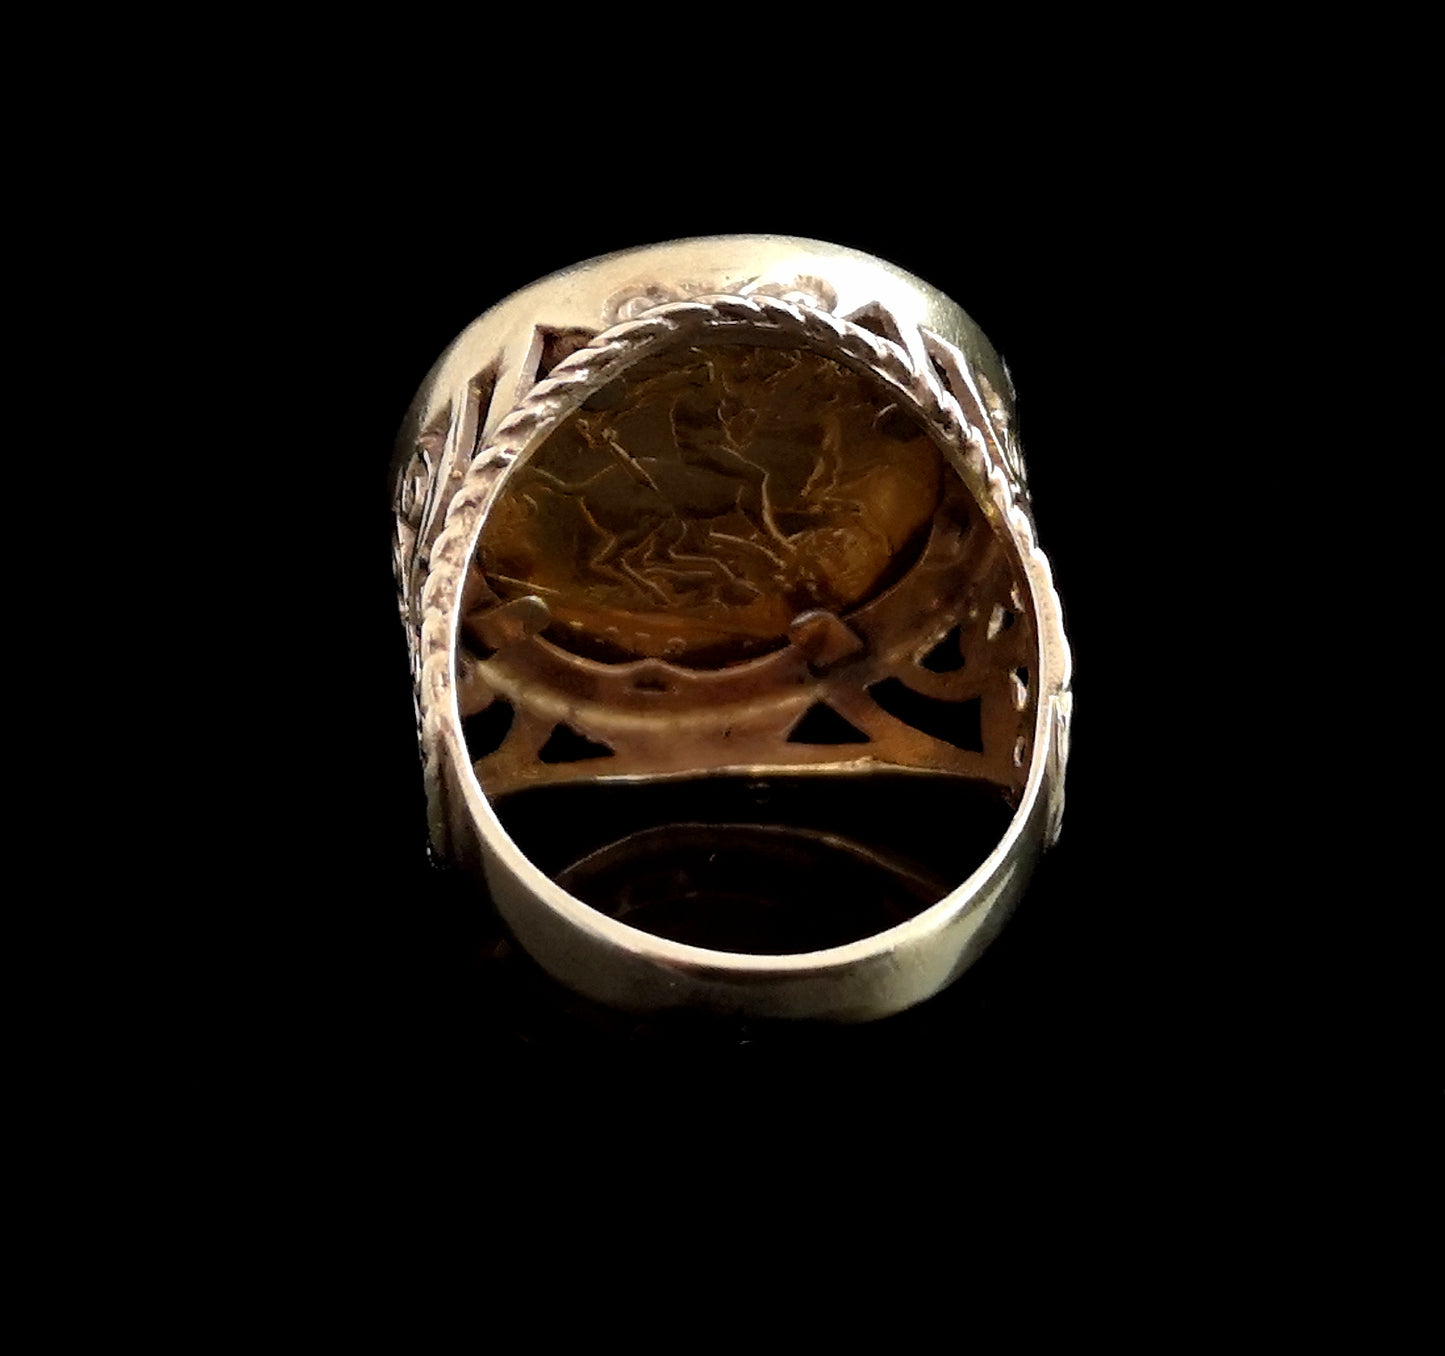 Antique 22ct gold Sovereign ring, 9ct gold mount